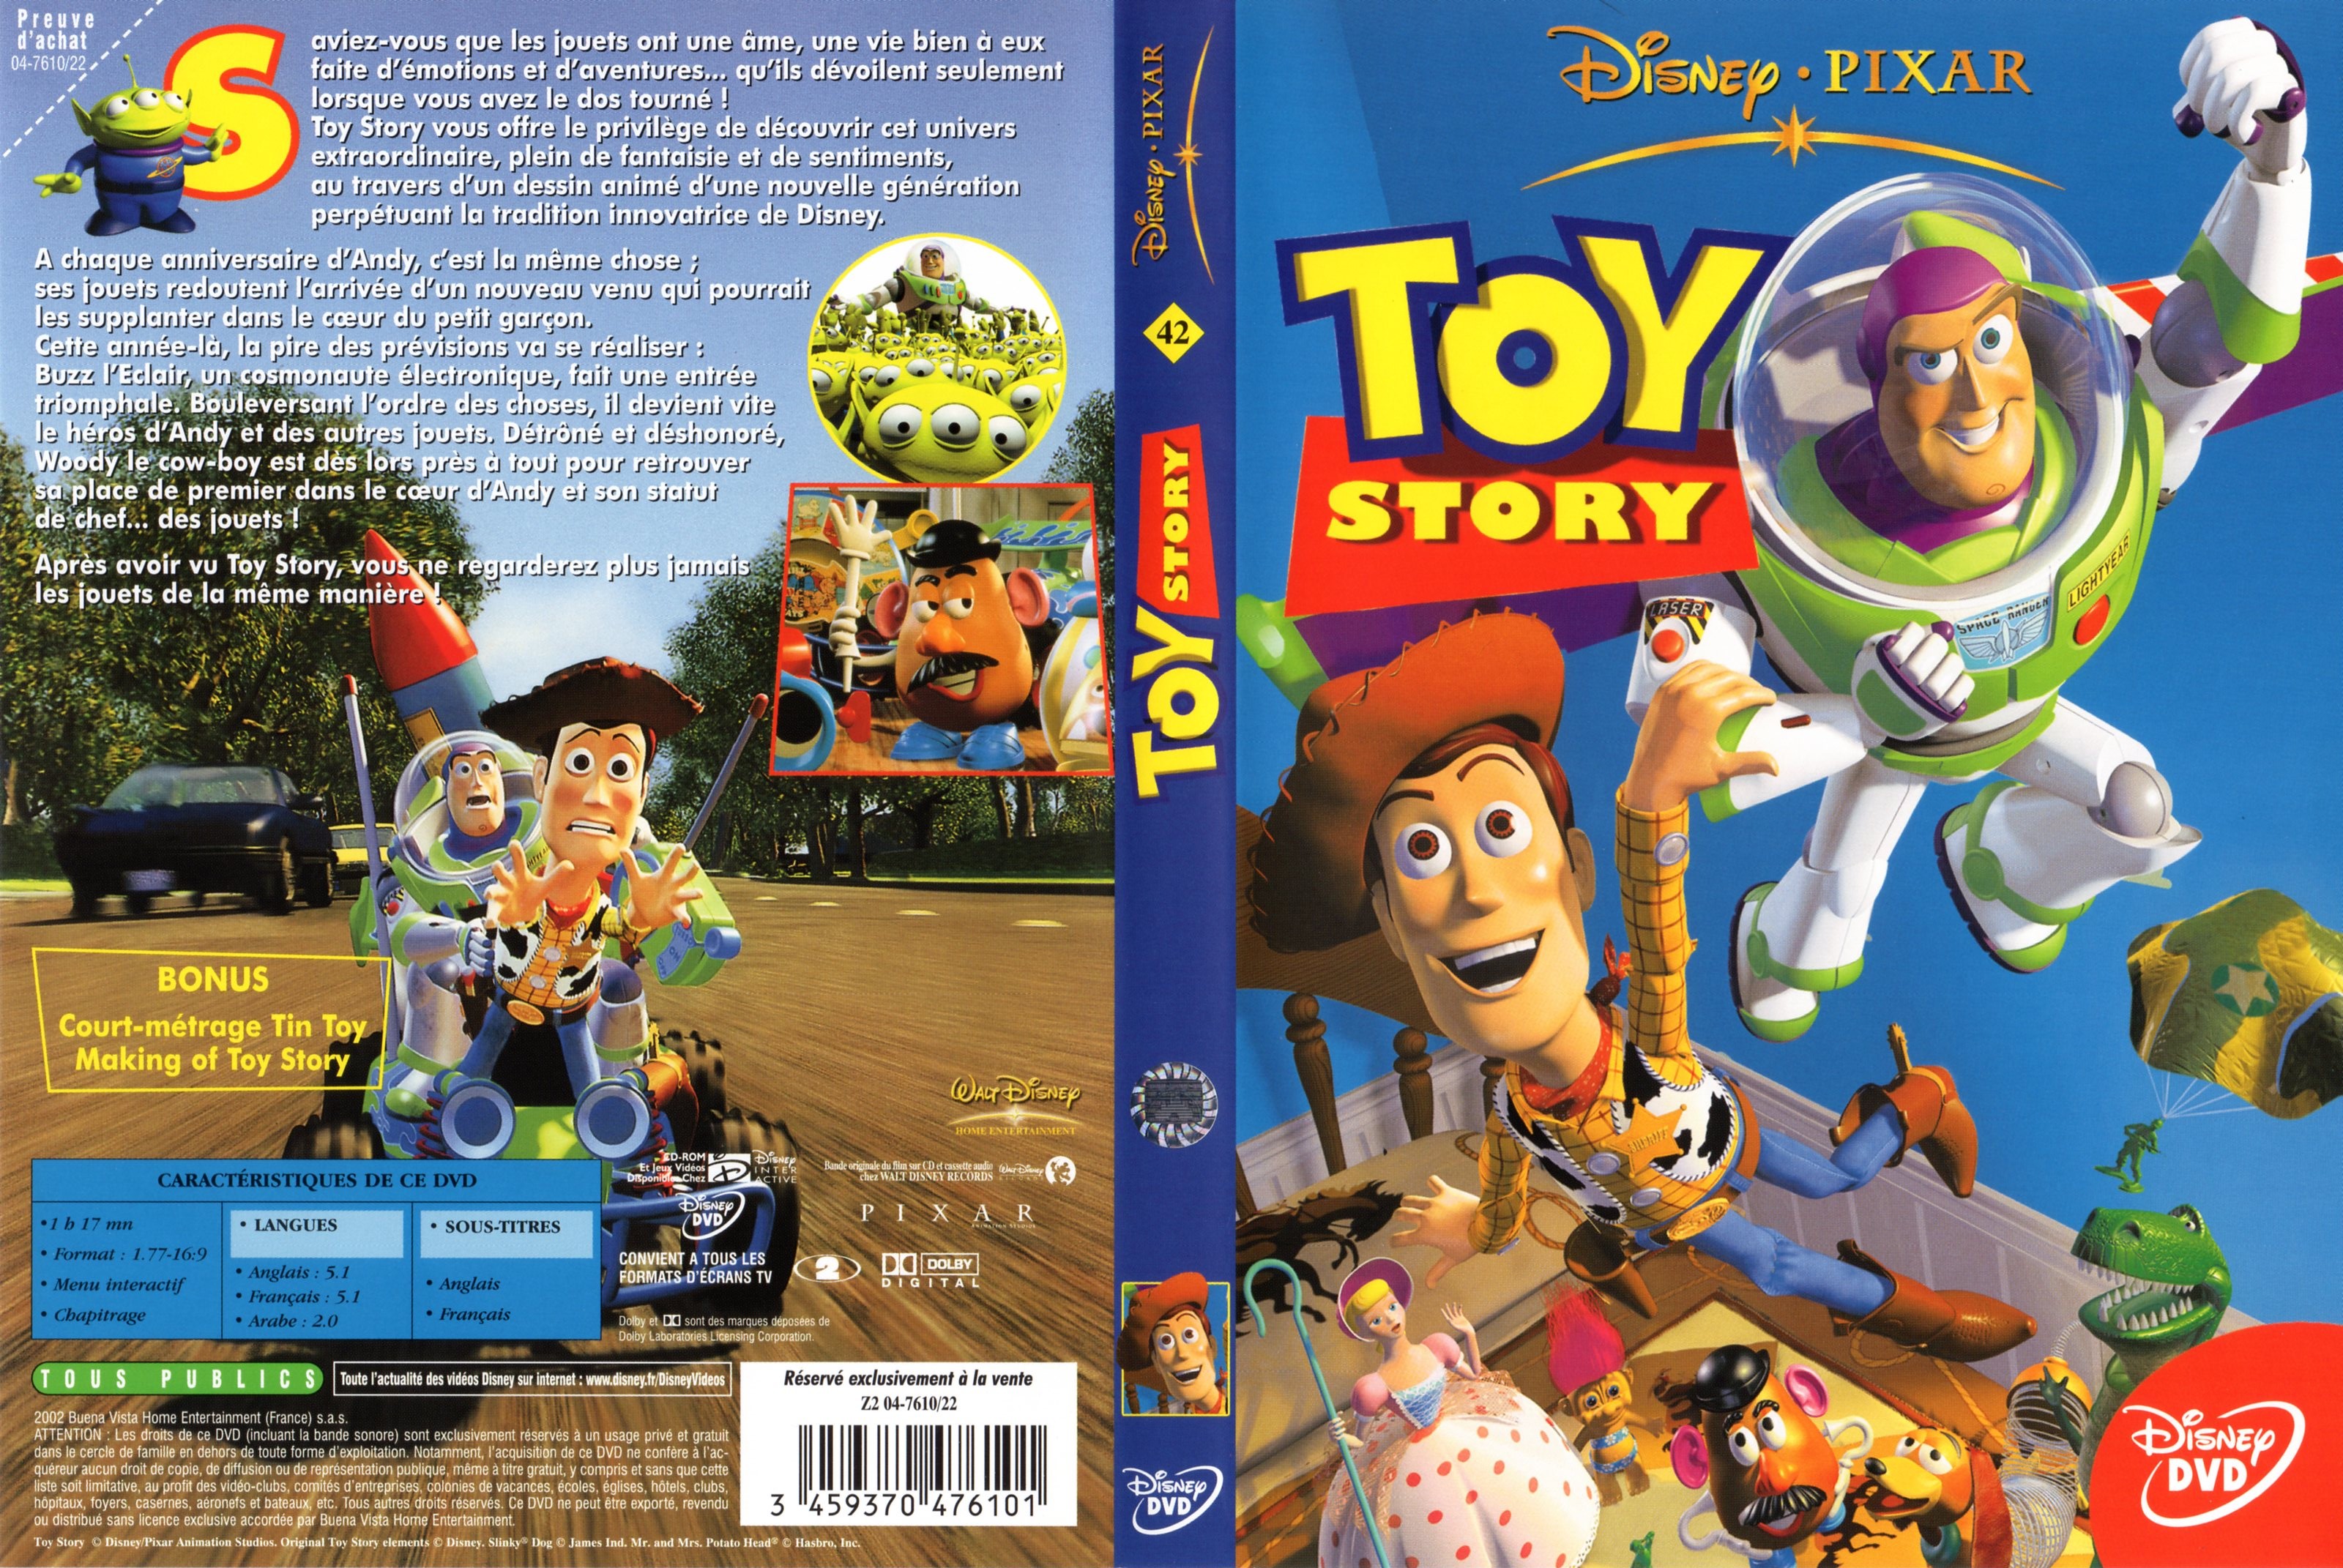 Jaquette DVD Toy story v2